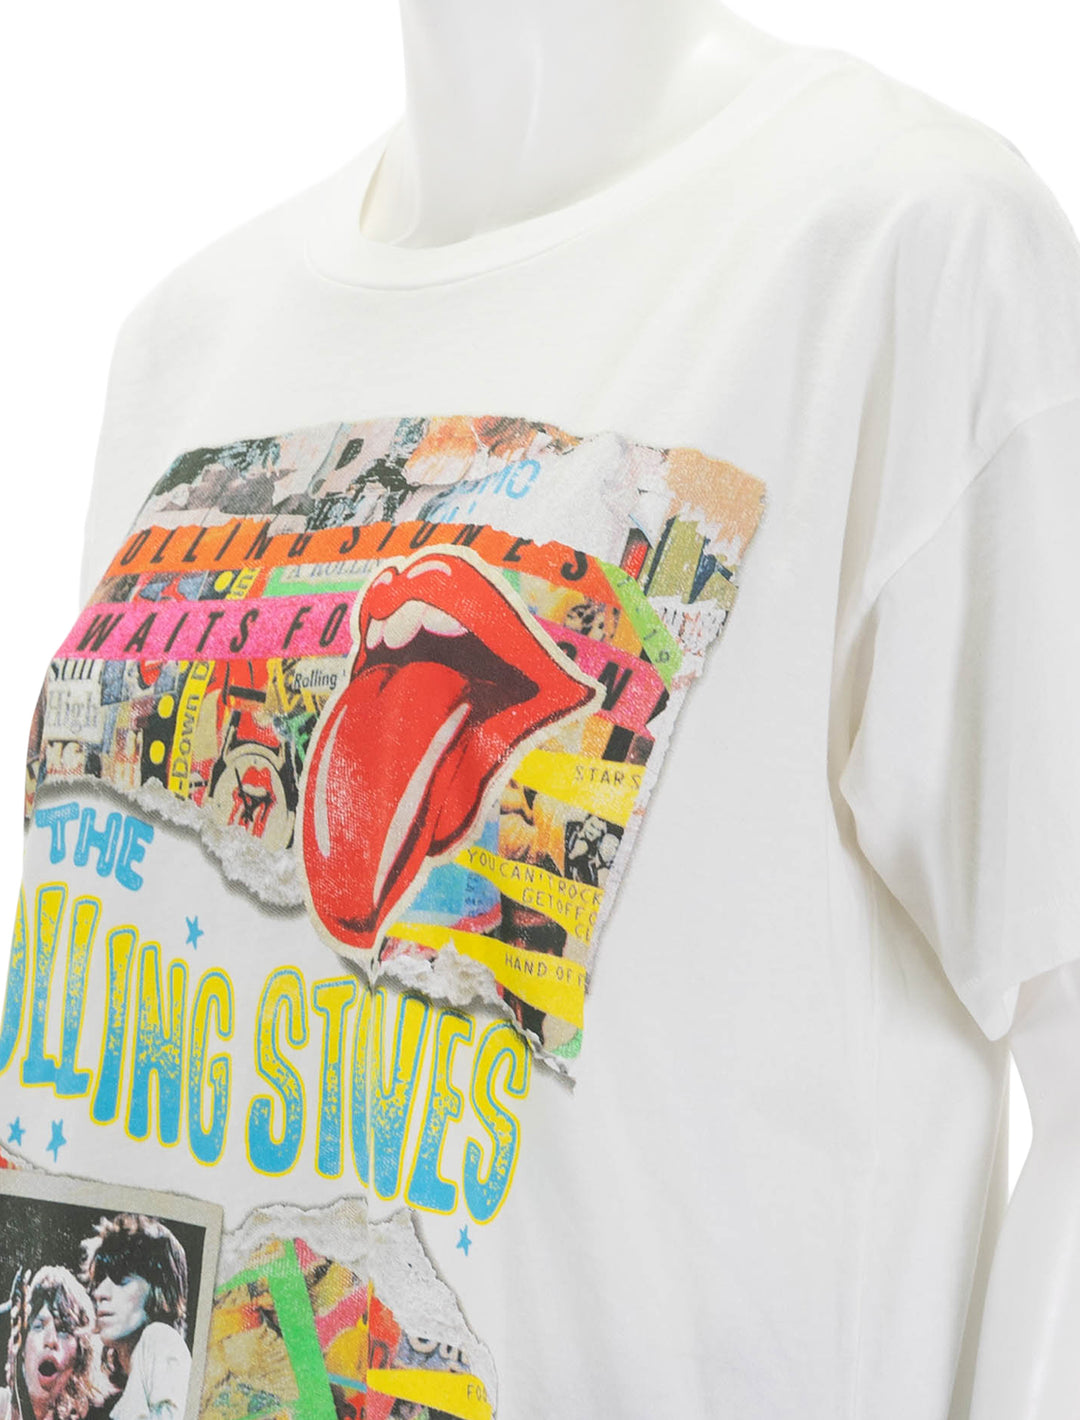 Close-up view of Daydreamer's rolling stones time waits for no one merch tee.